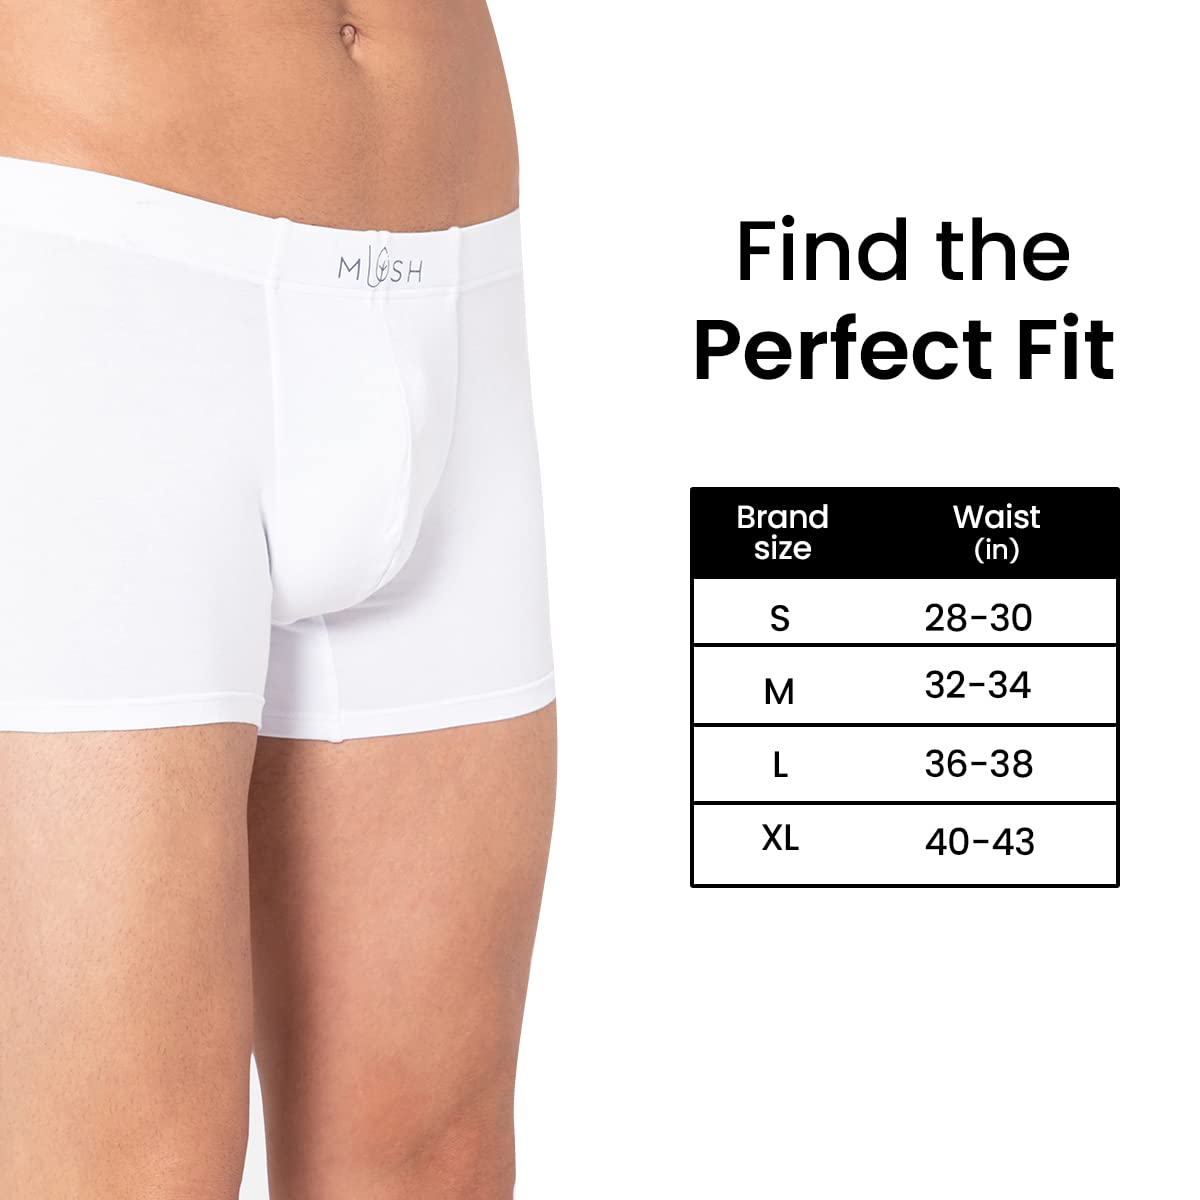 Mush Ultra Soft, Breathable, Feather Light Men's Bamboo Trunk || Naturally Anti-Odor and Anti-Microbial Bamboo Innerwear Pack of 2 (M, Blue and White)